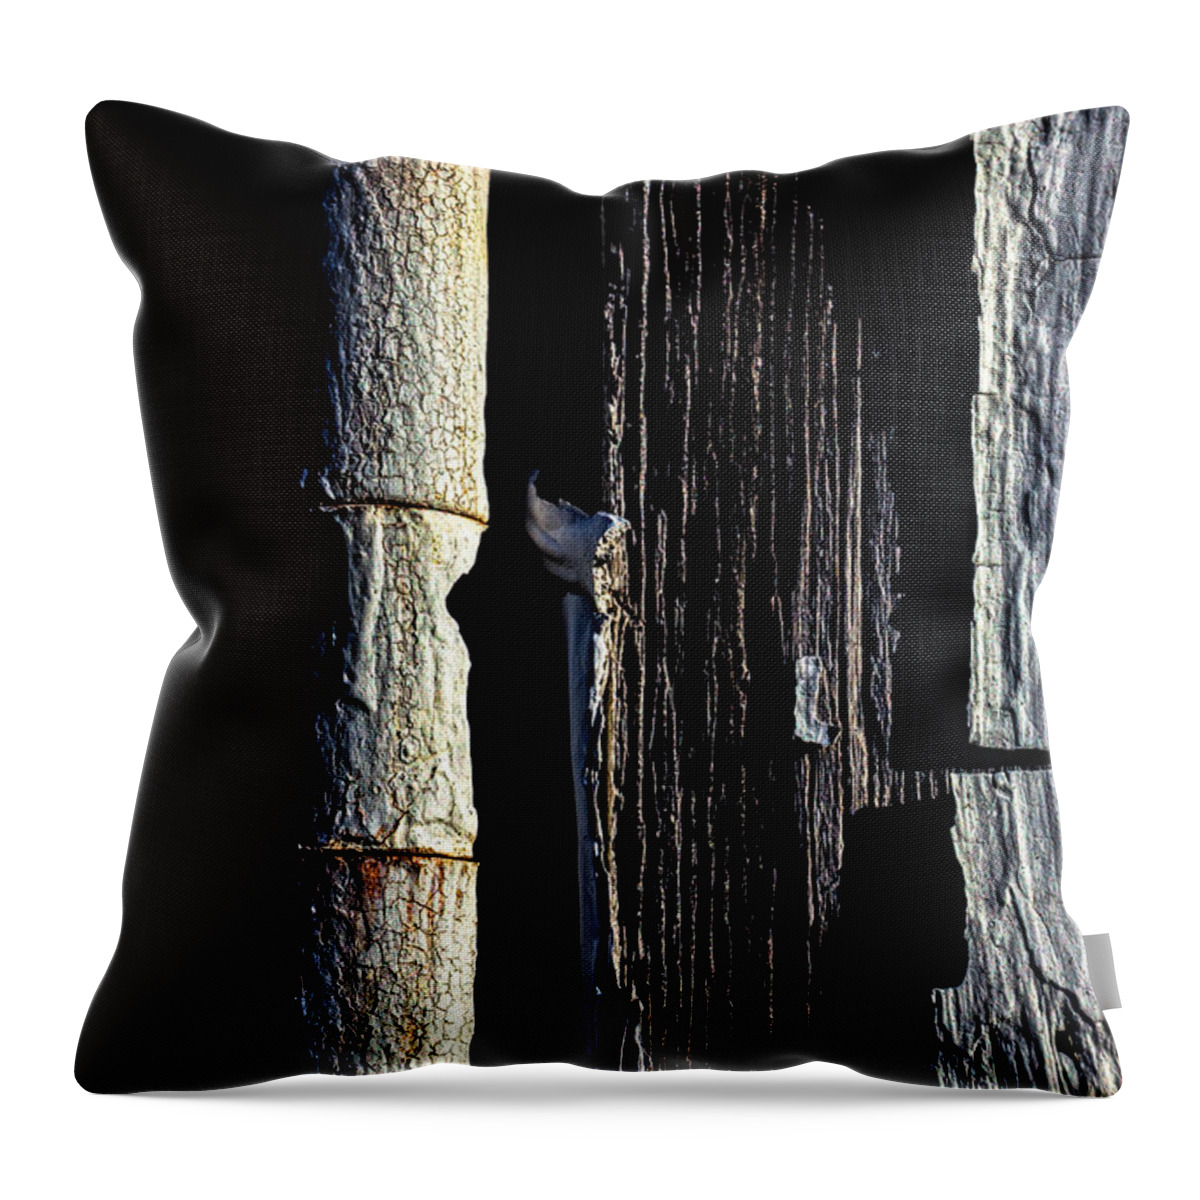 Abstract Throw Pillow featuring the photograph White Hinge On The Old Red Barn by Bob Orsillo